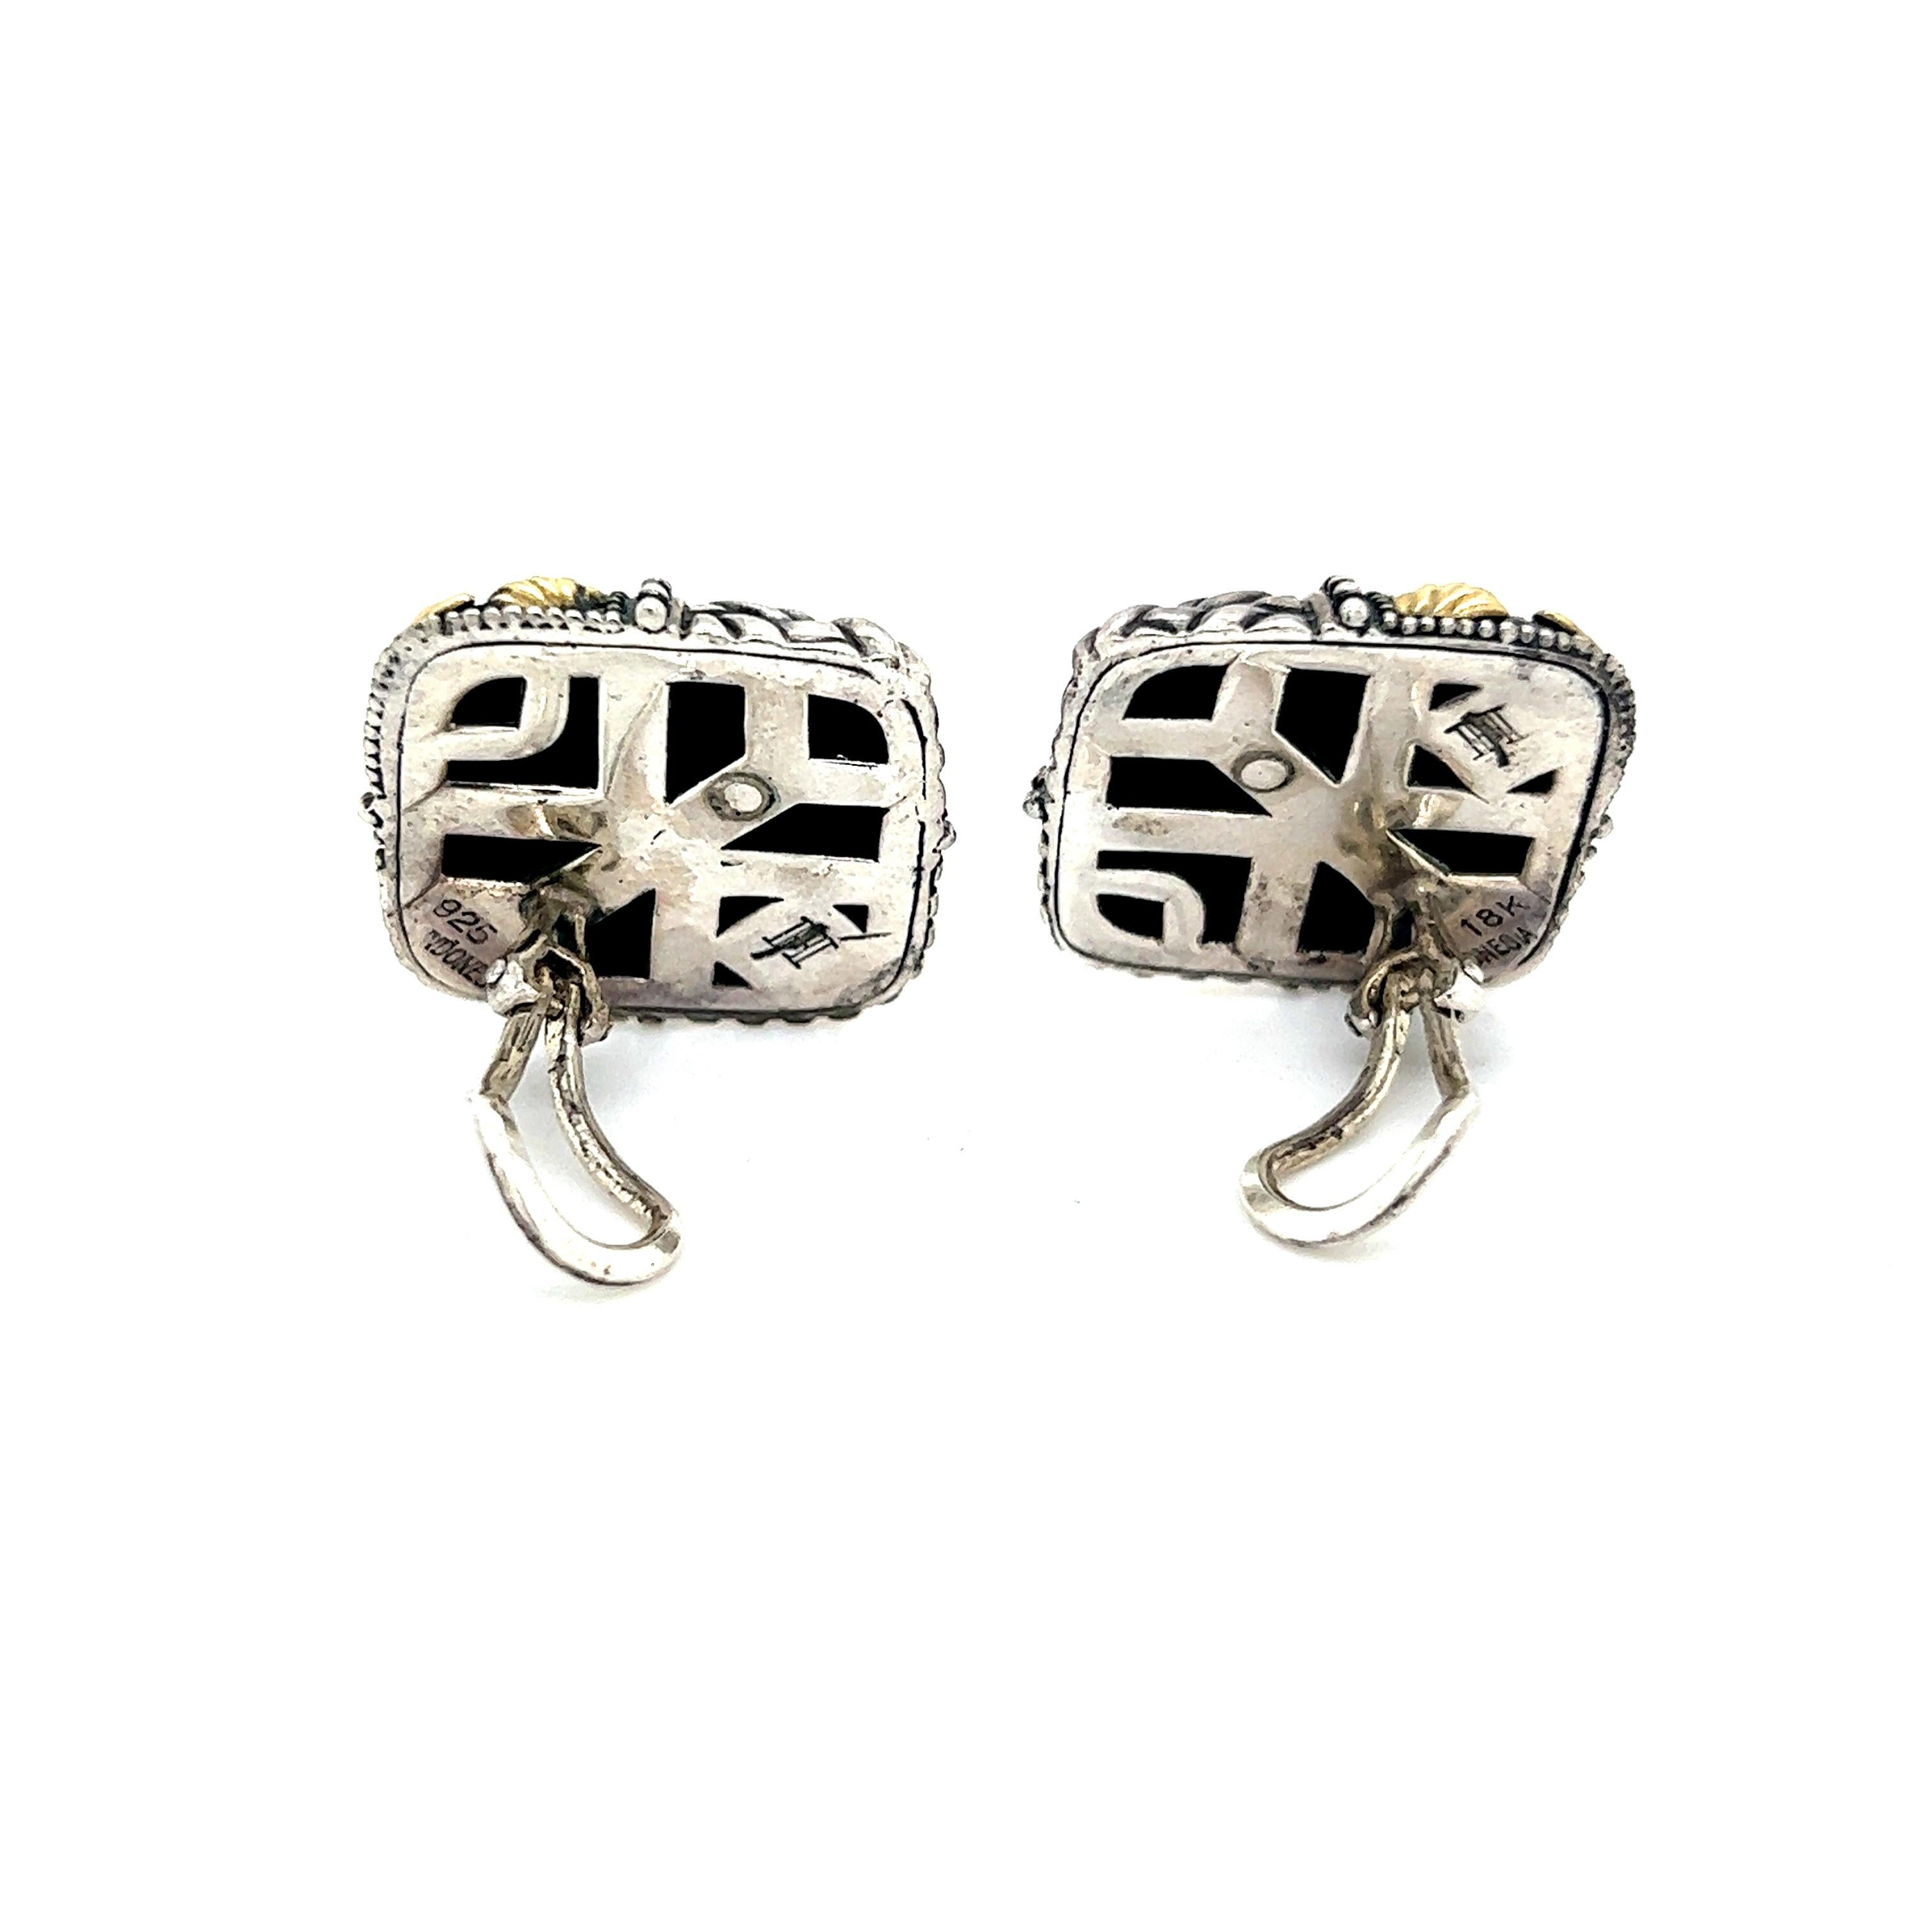 John Hardy Estate Square Ornate Clip-on Earrings 18k Y Gold + Sterling Silver In Good Condition For Sale In Brooklyn, NY